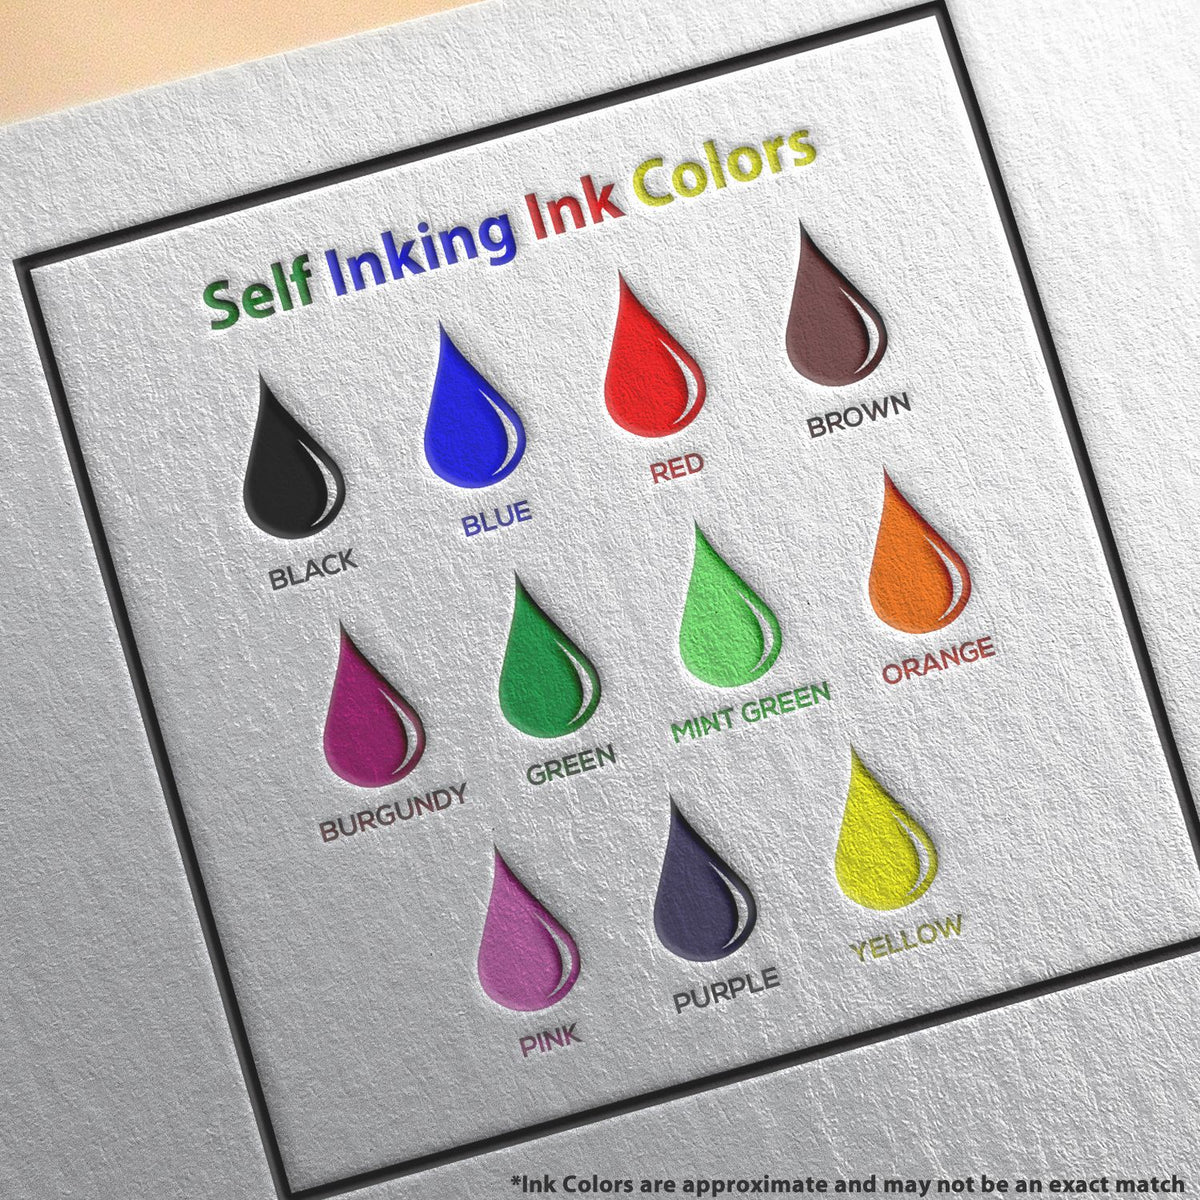 A picture showing the different ink colors or hues available for the Self-Inking Georgia Landscape Architect Stamp product.